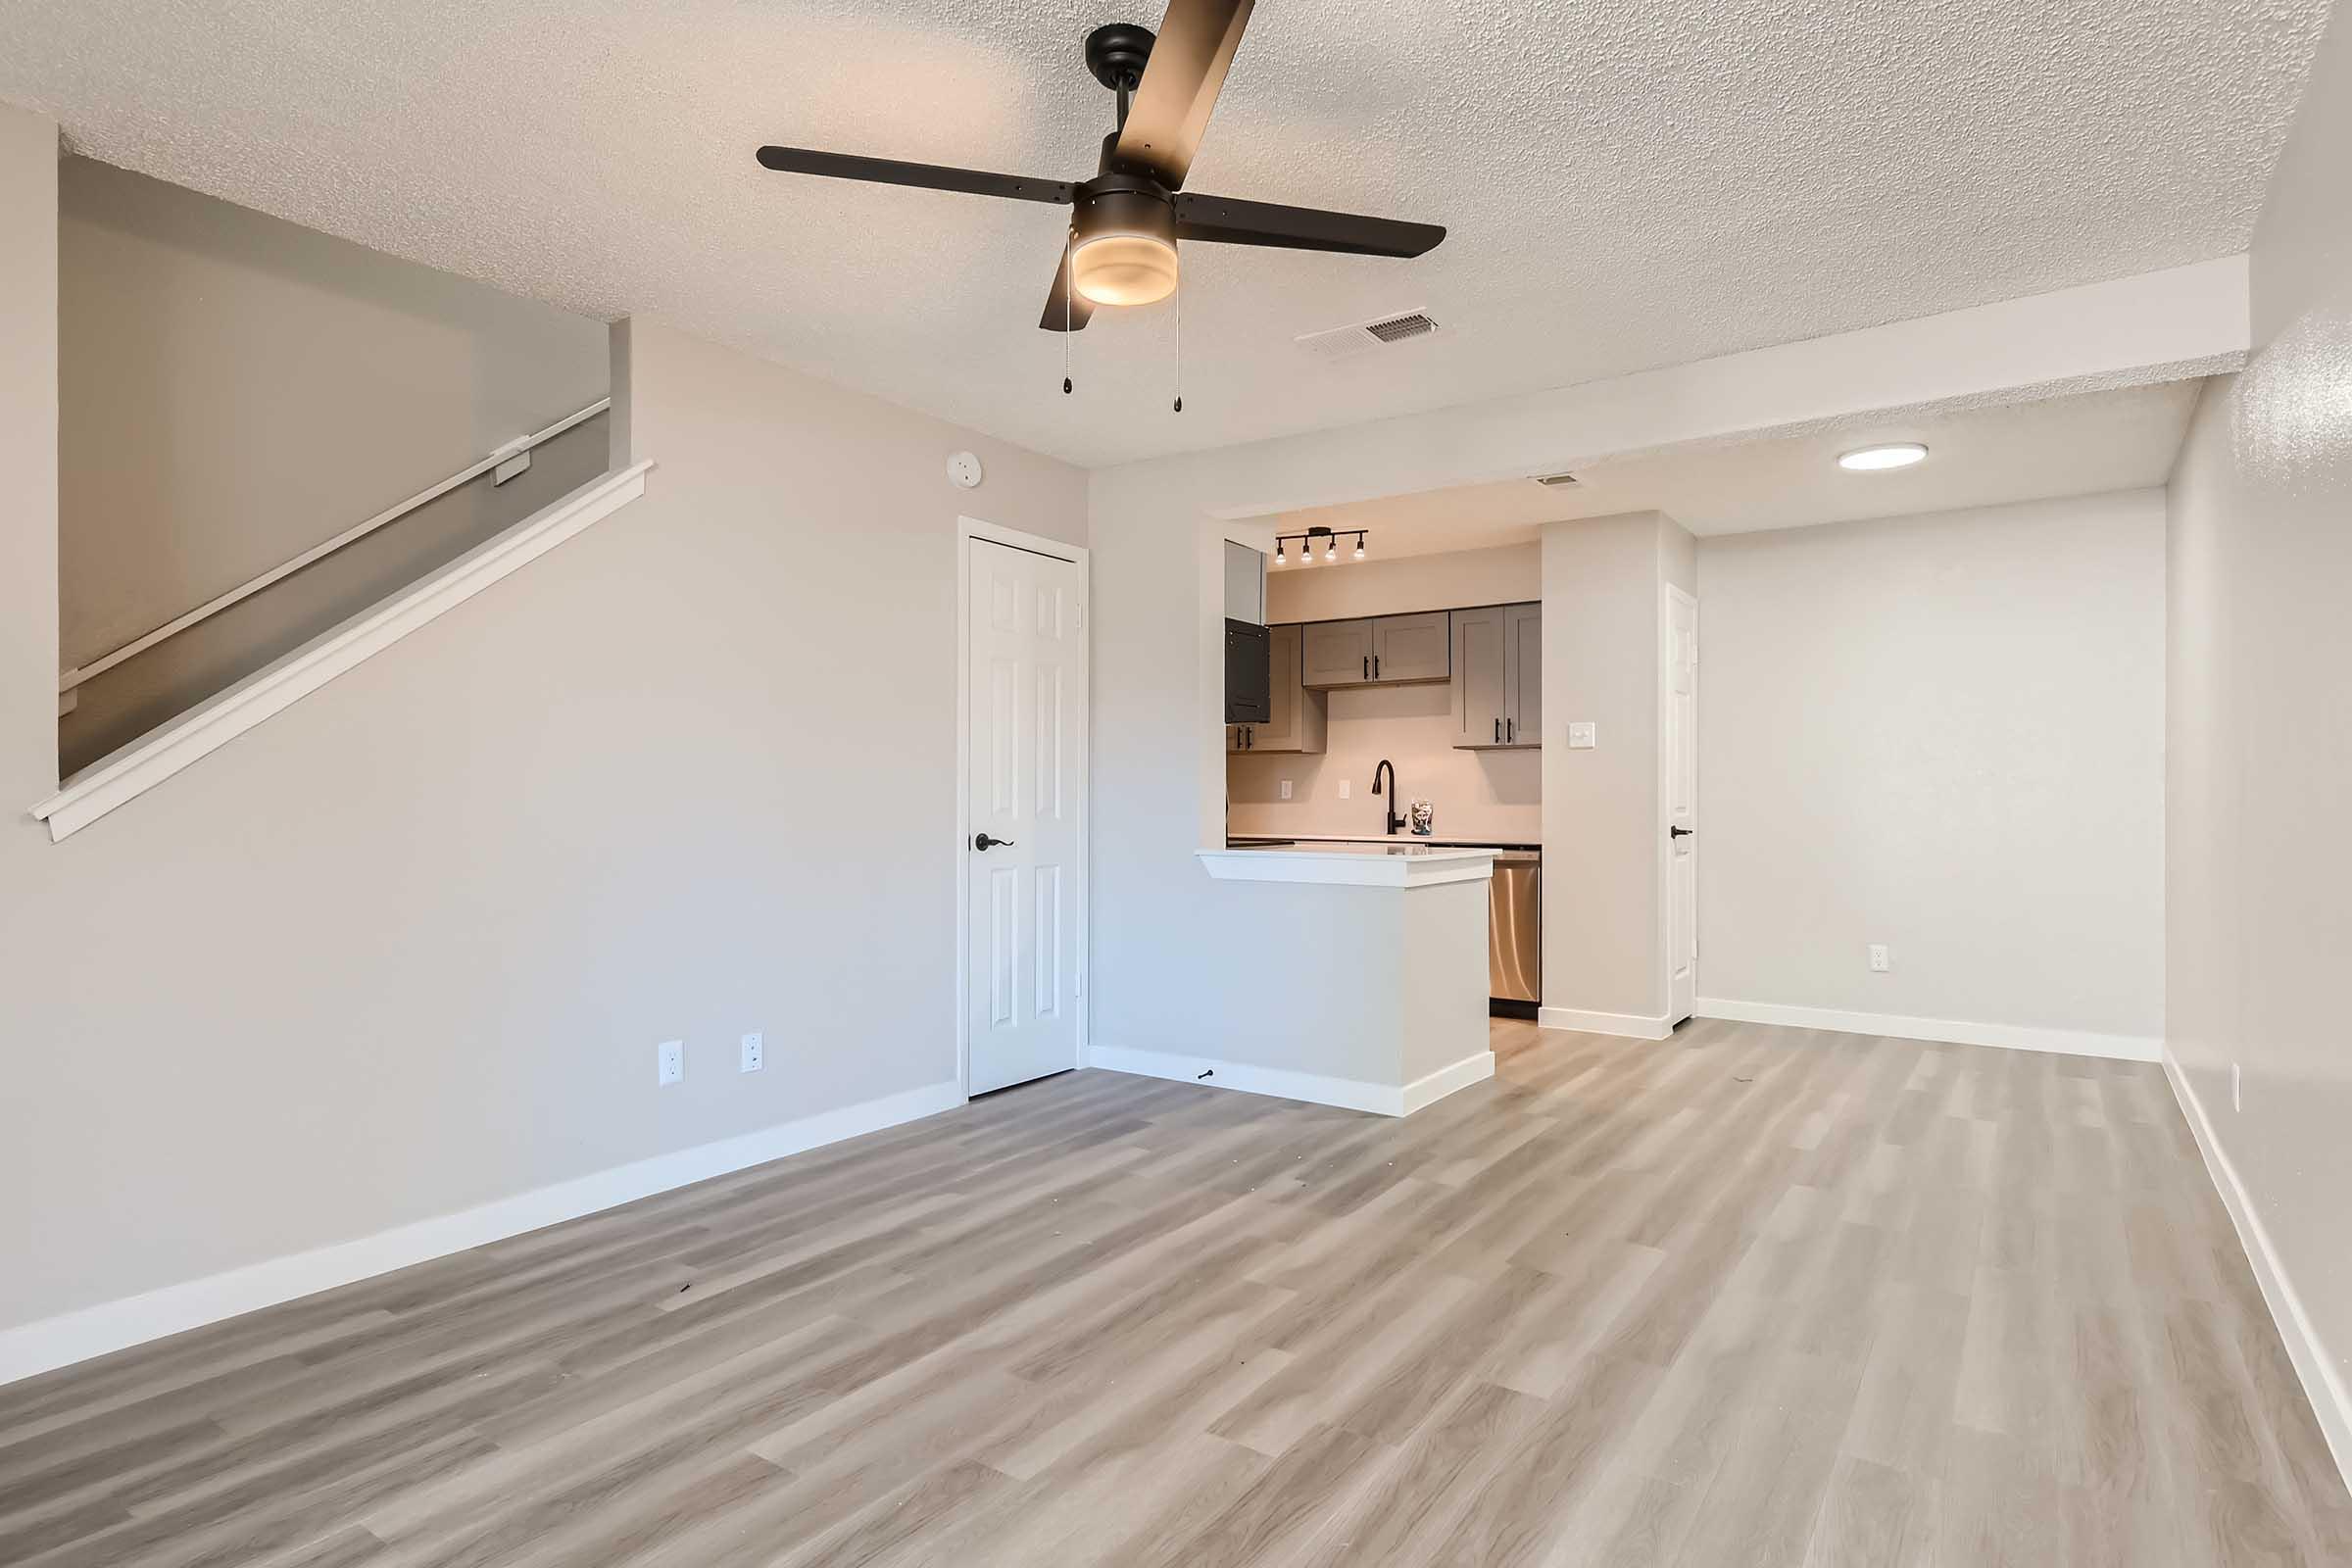 The open-concept living room with wood-style flooring and a kitchen at Rise North Arlington.